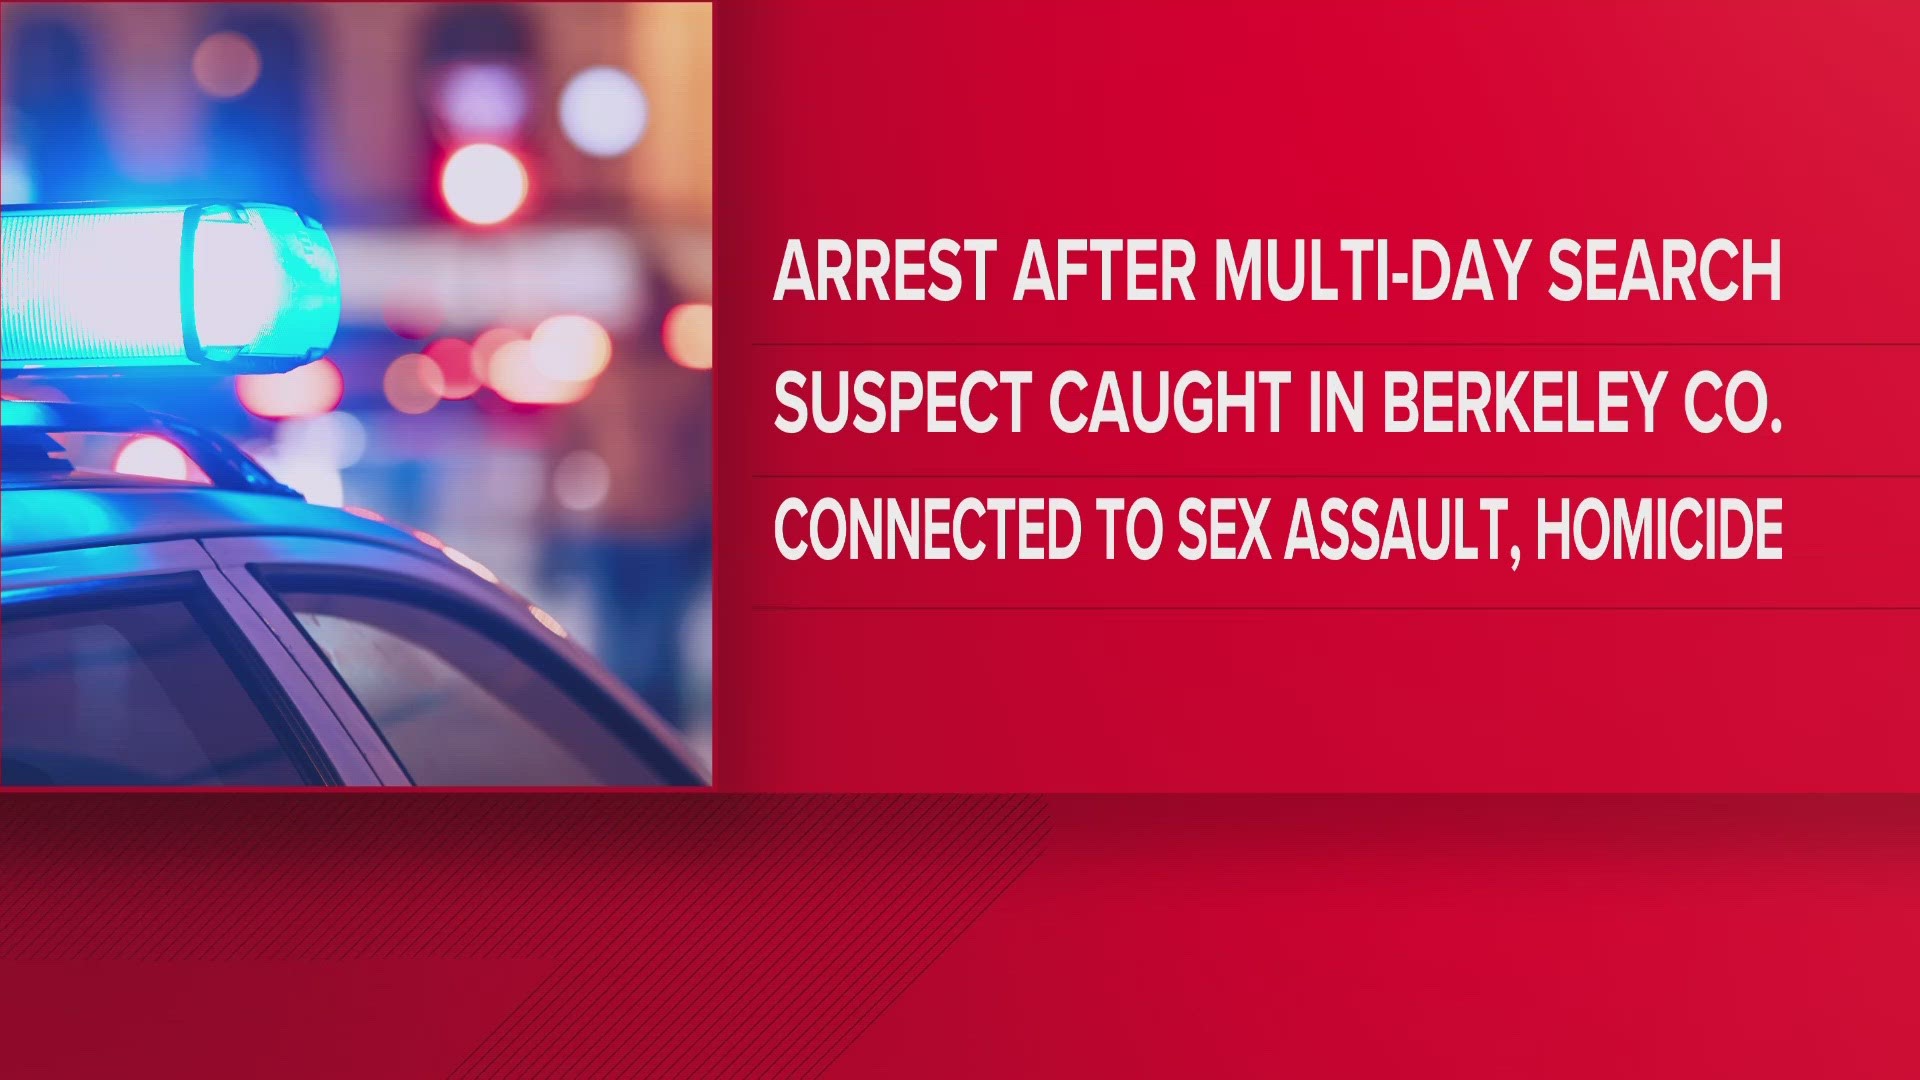 A multi-day search ended in the arrest of a man wanted for sexual assault an homicide